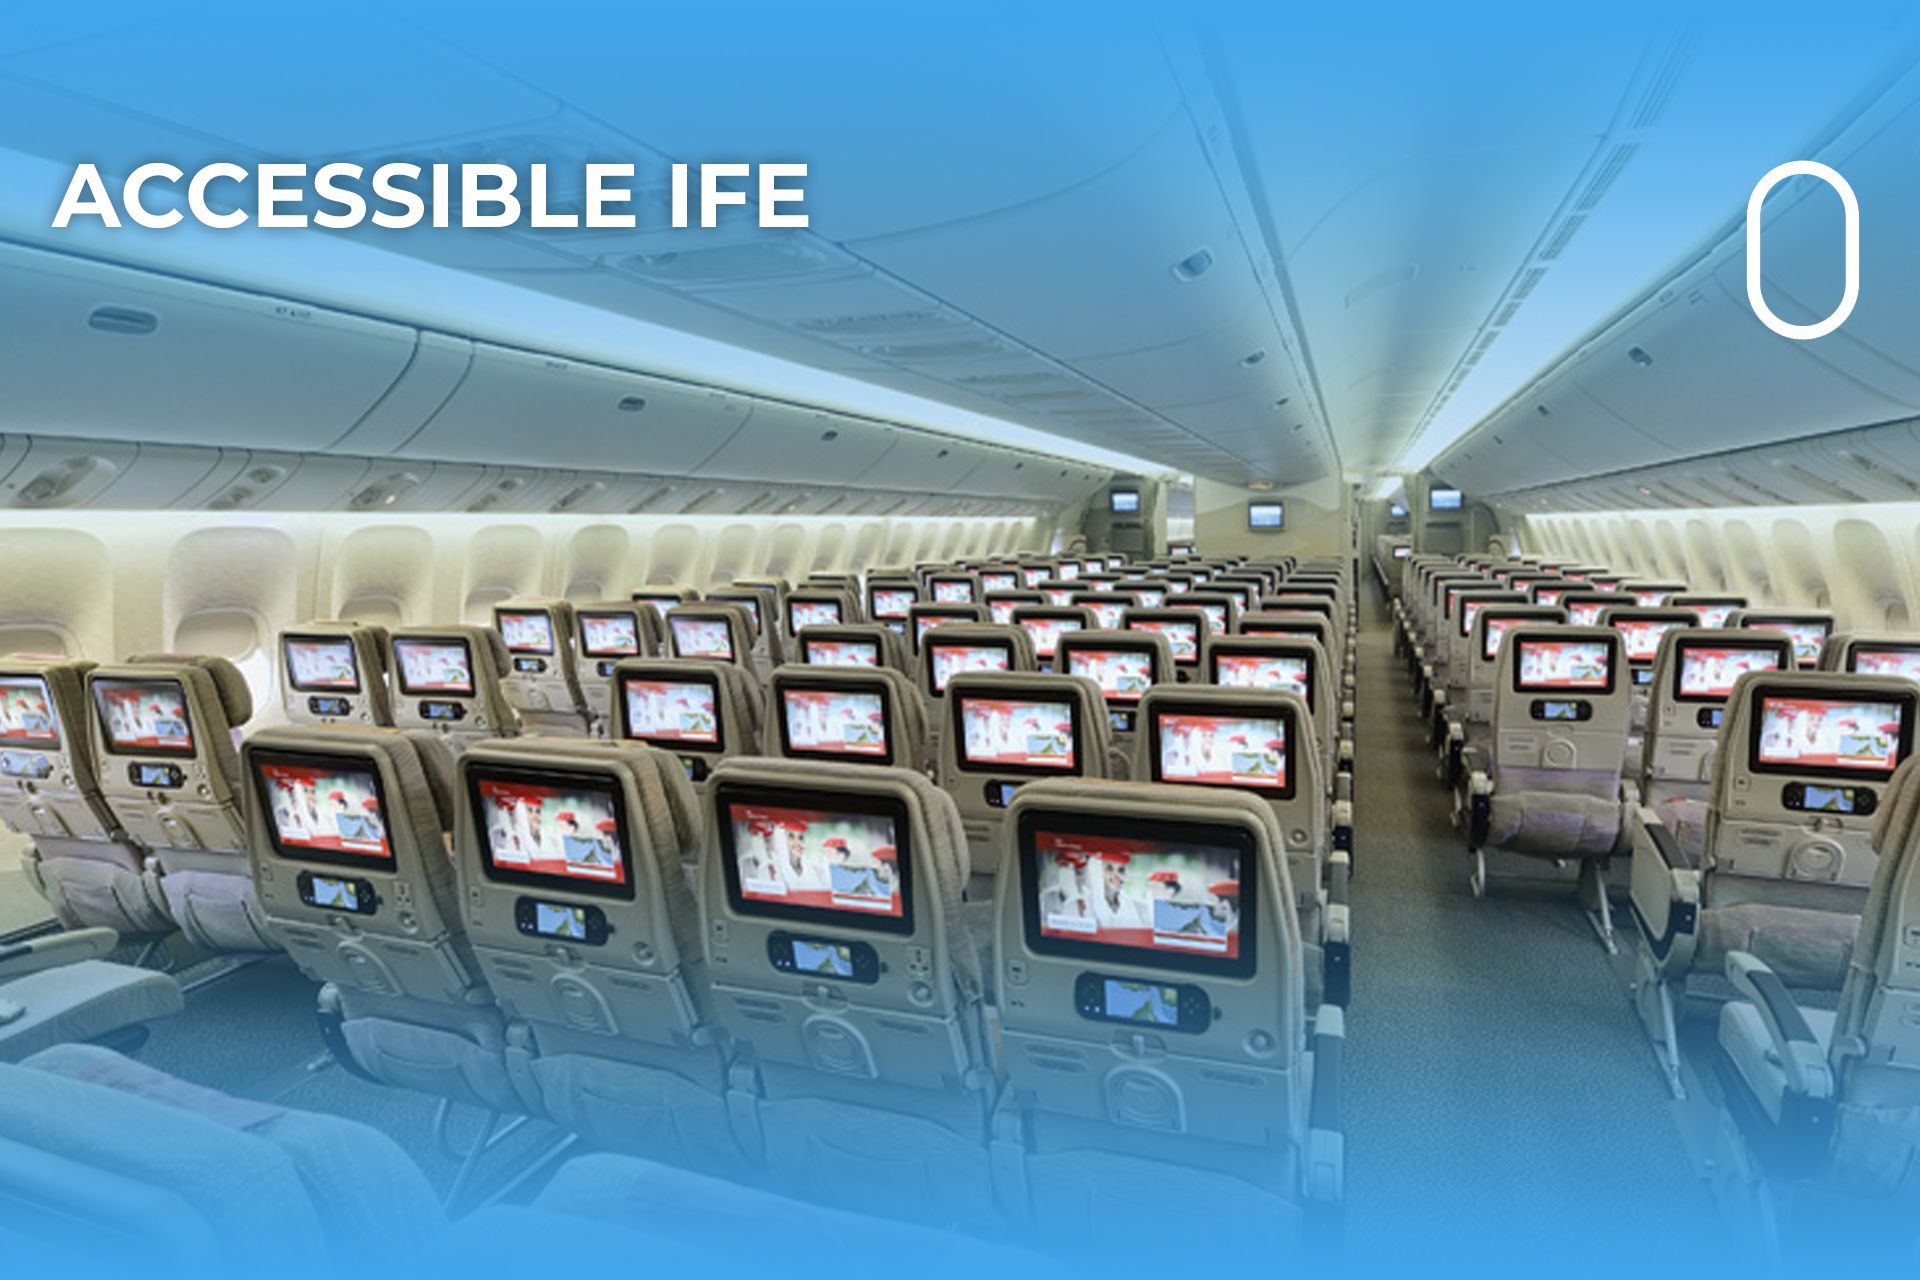 How Emirates leads the adoption of inflight entertainment